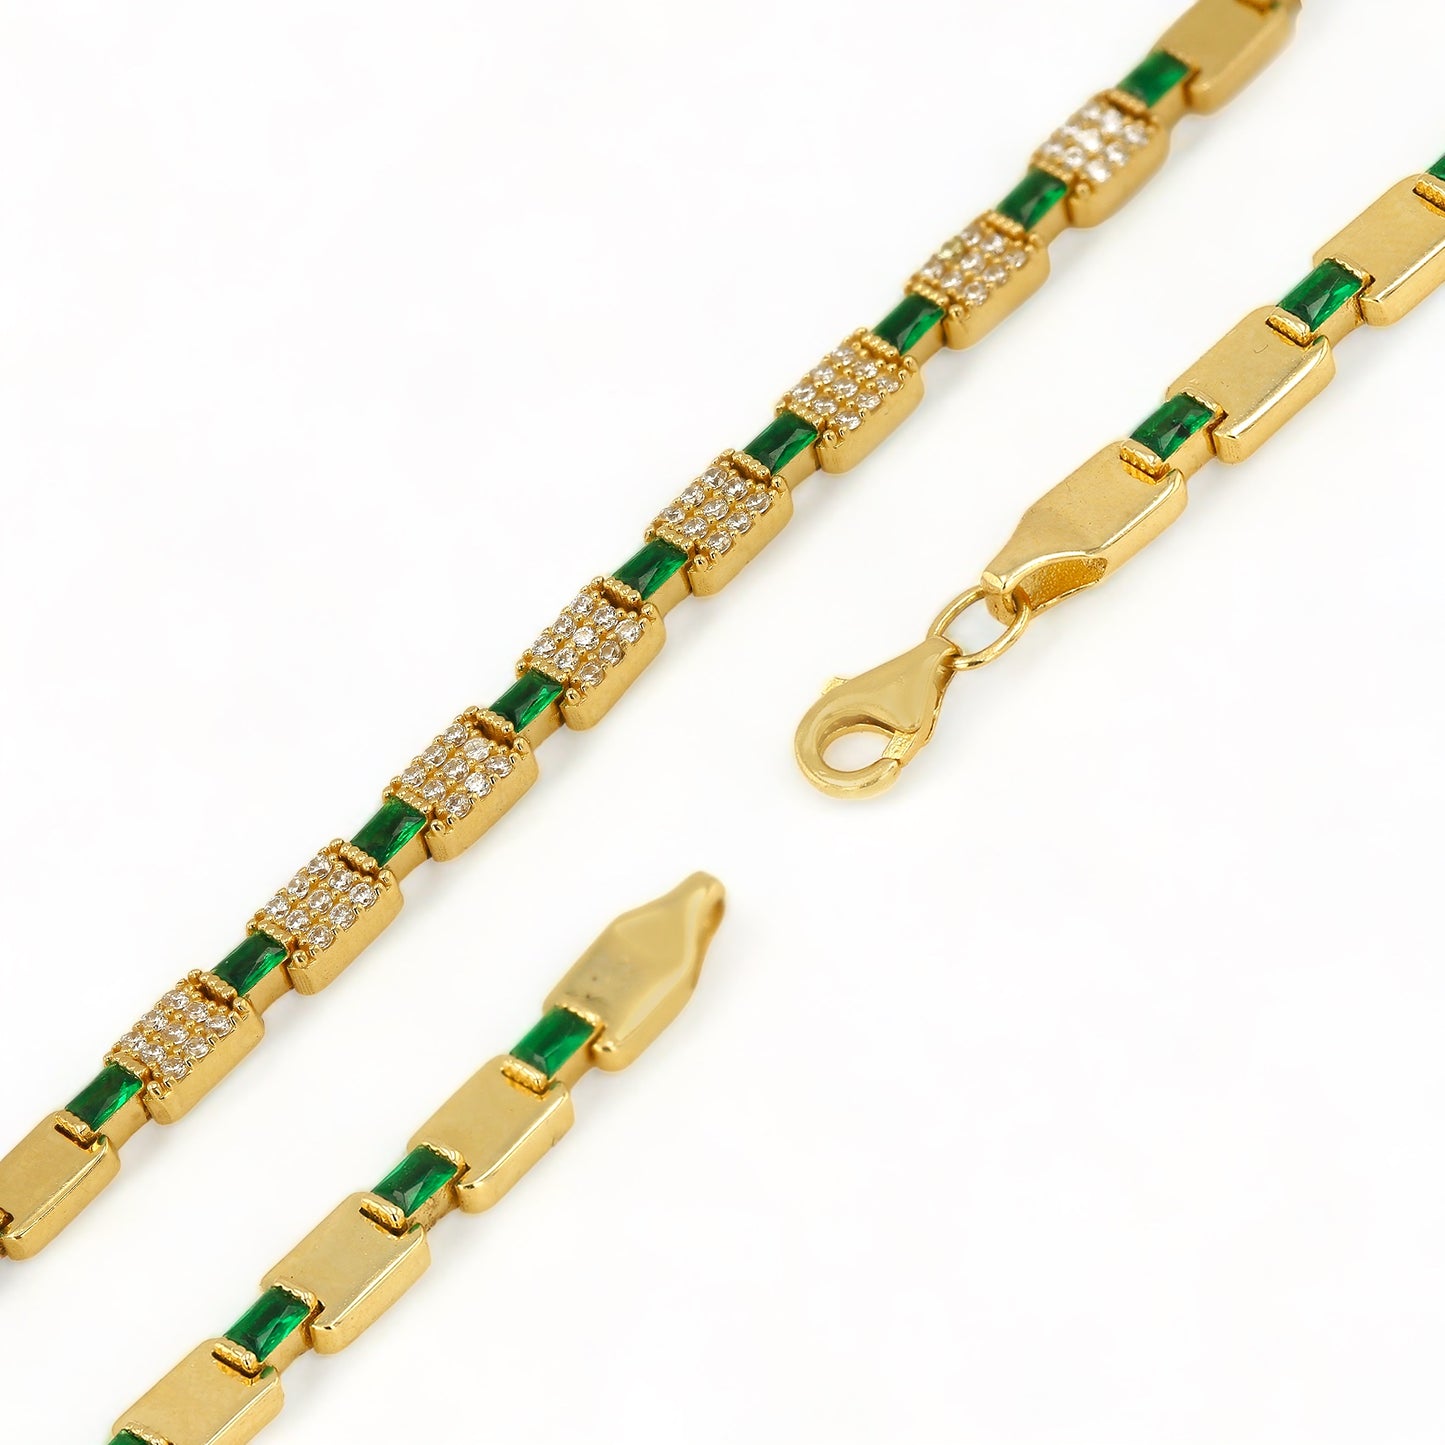 14K Yellow Gold Bracelet with Green and White Stones - 1003